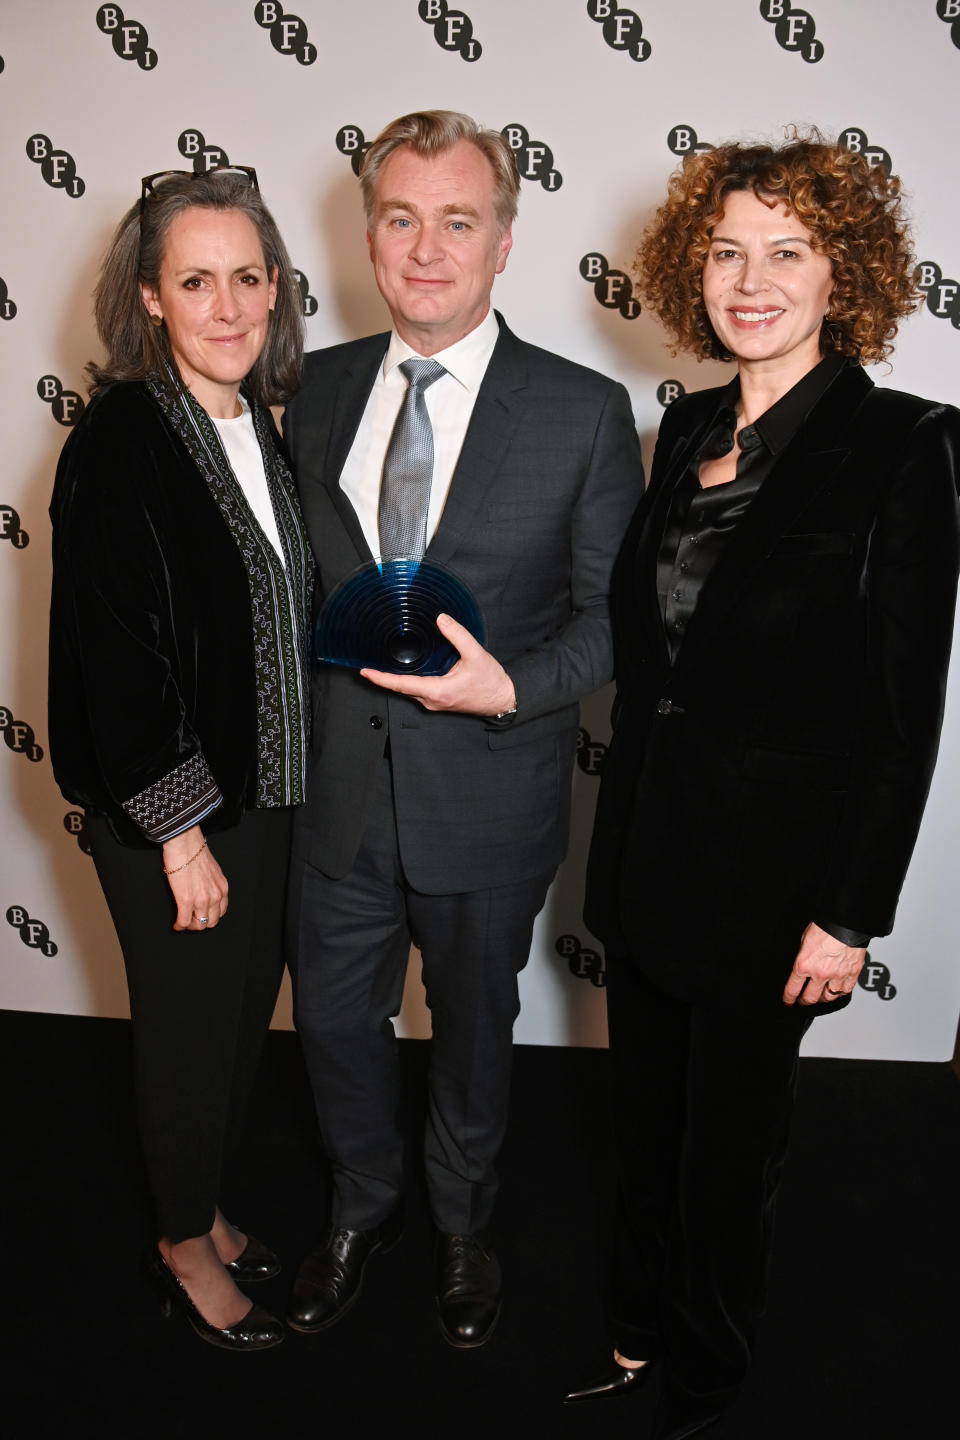 From left: Emma Thomas, Christopher Nolan and NBCUniversal Studio Group Chairman and Chief Content Officer Donna Langley at the BFI Chairman’s dinner. (Dave Benett/Getty Images)